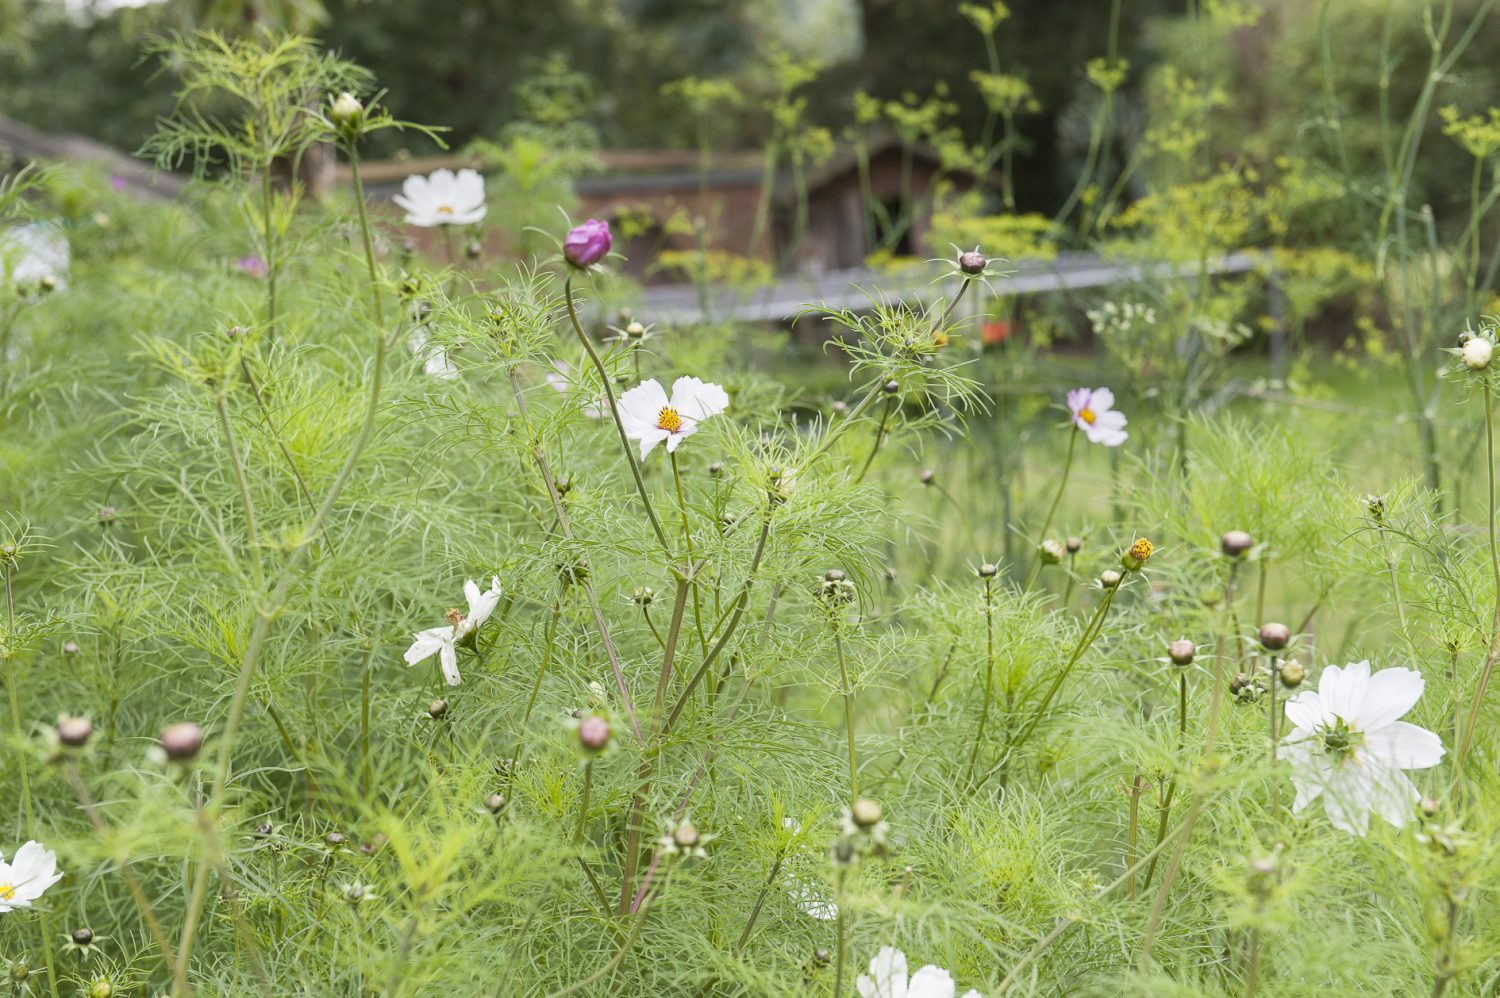 Cosmos fronds provide a rich sea of greenery dotted with pink and white petals